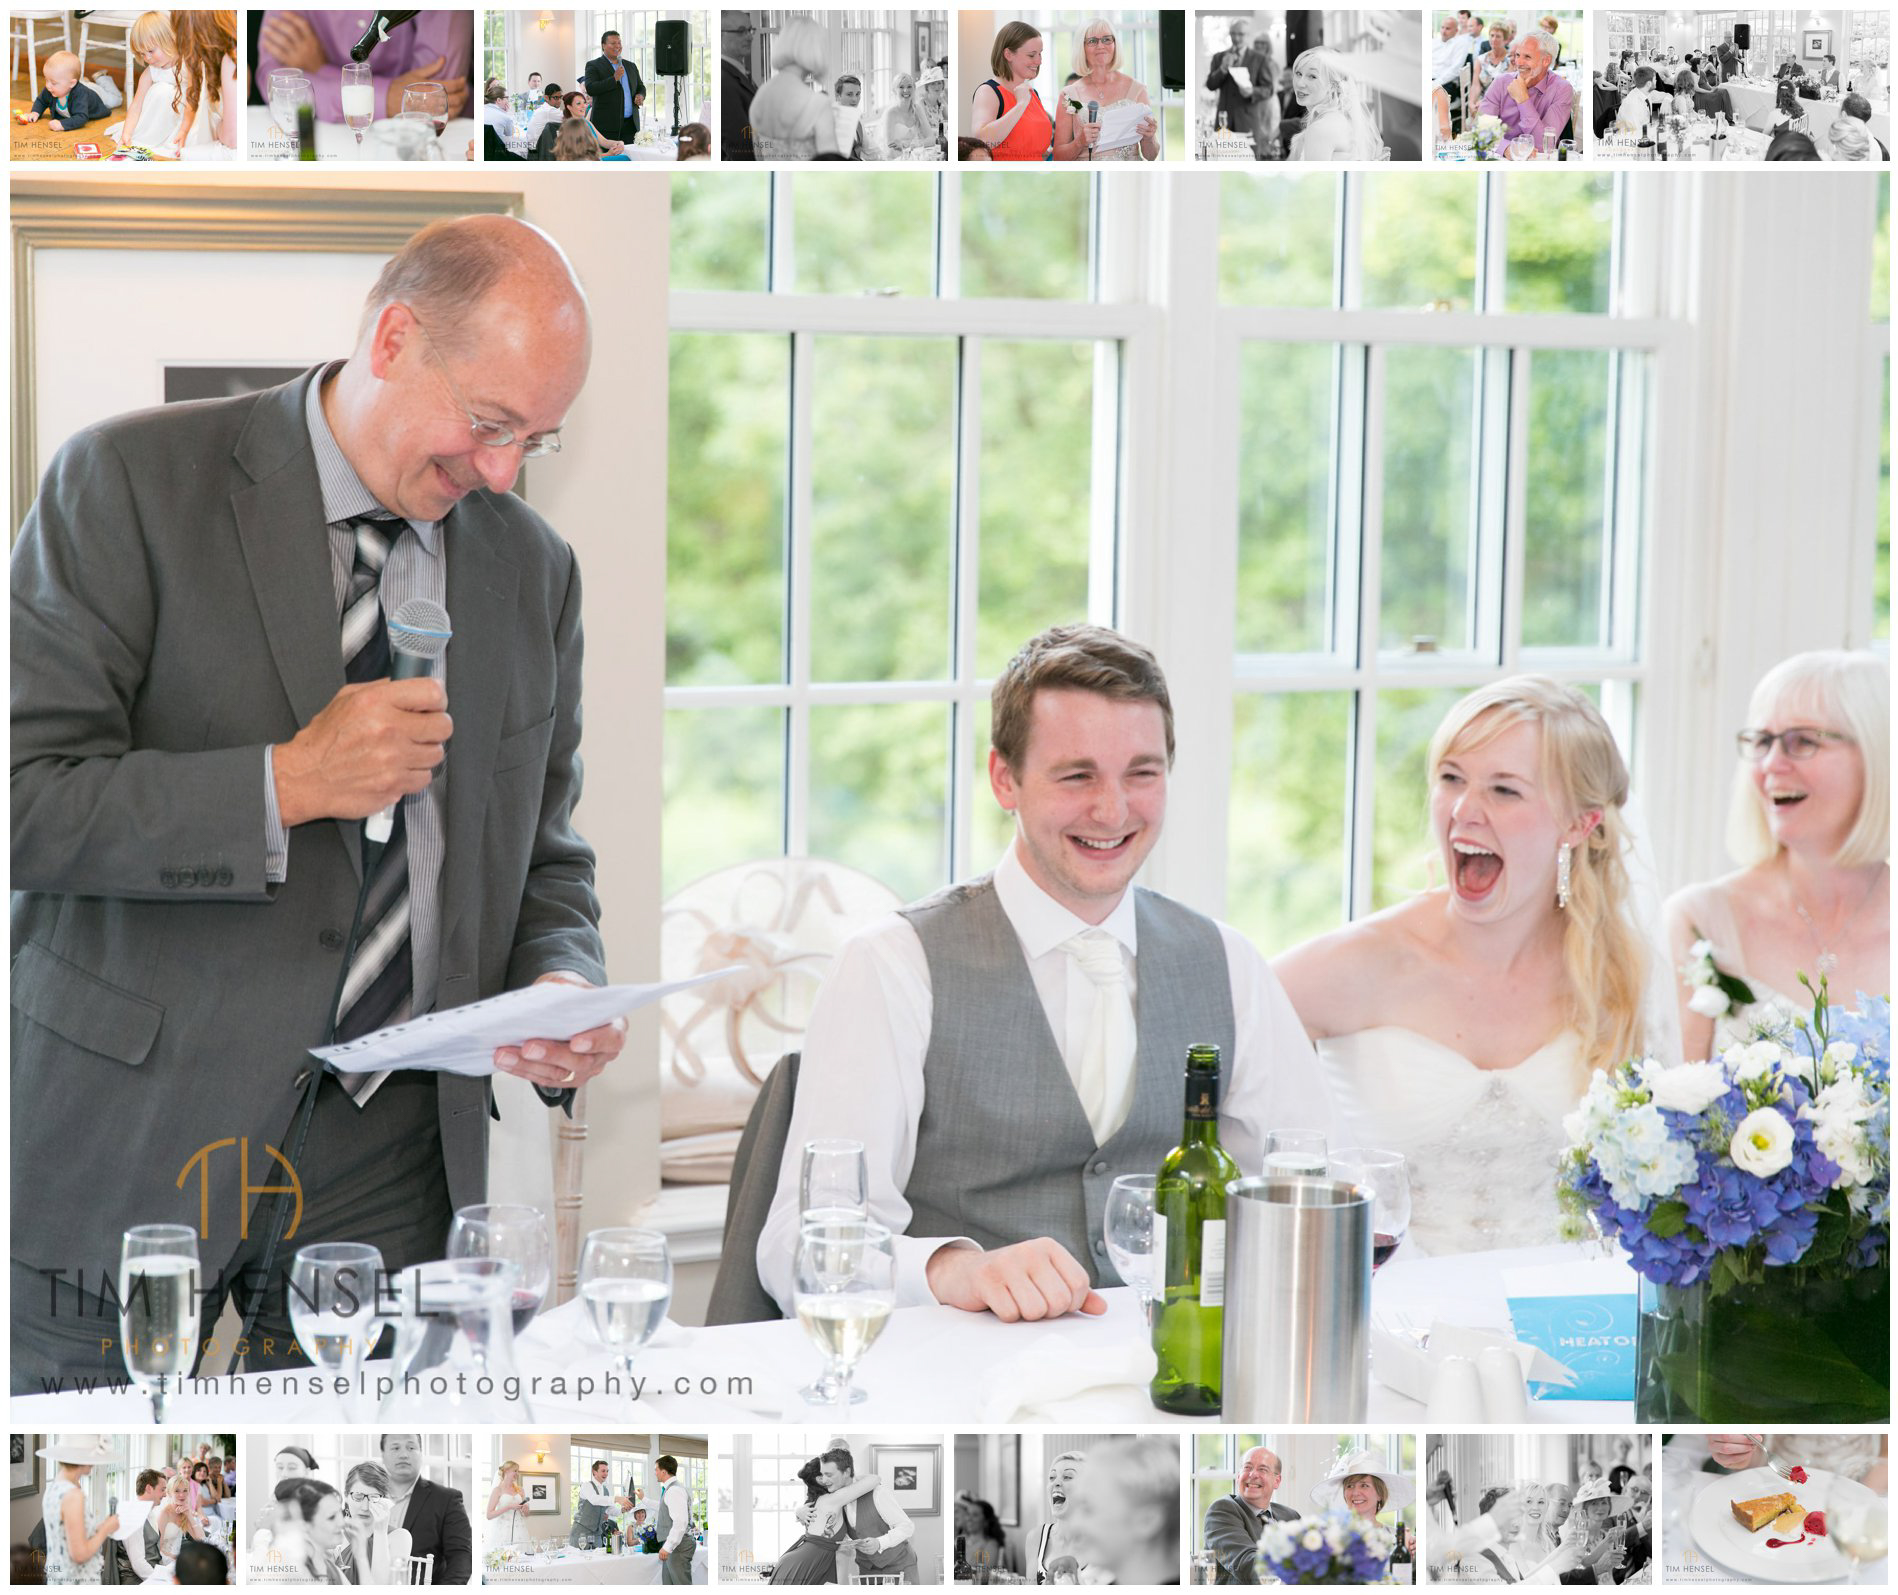 Wedding photographer during the speeches at Losehill House